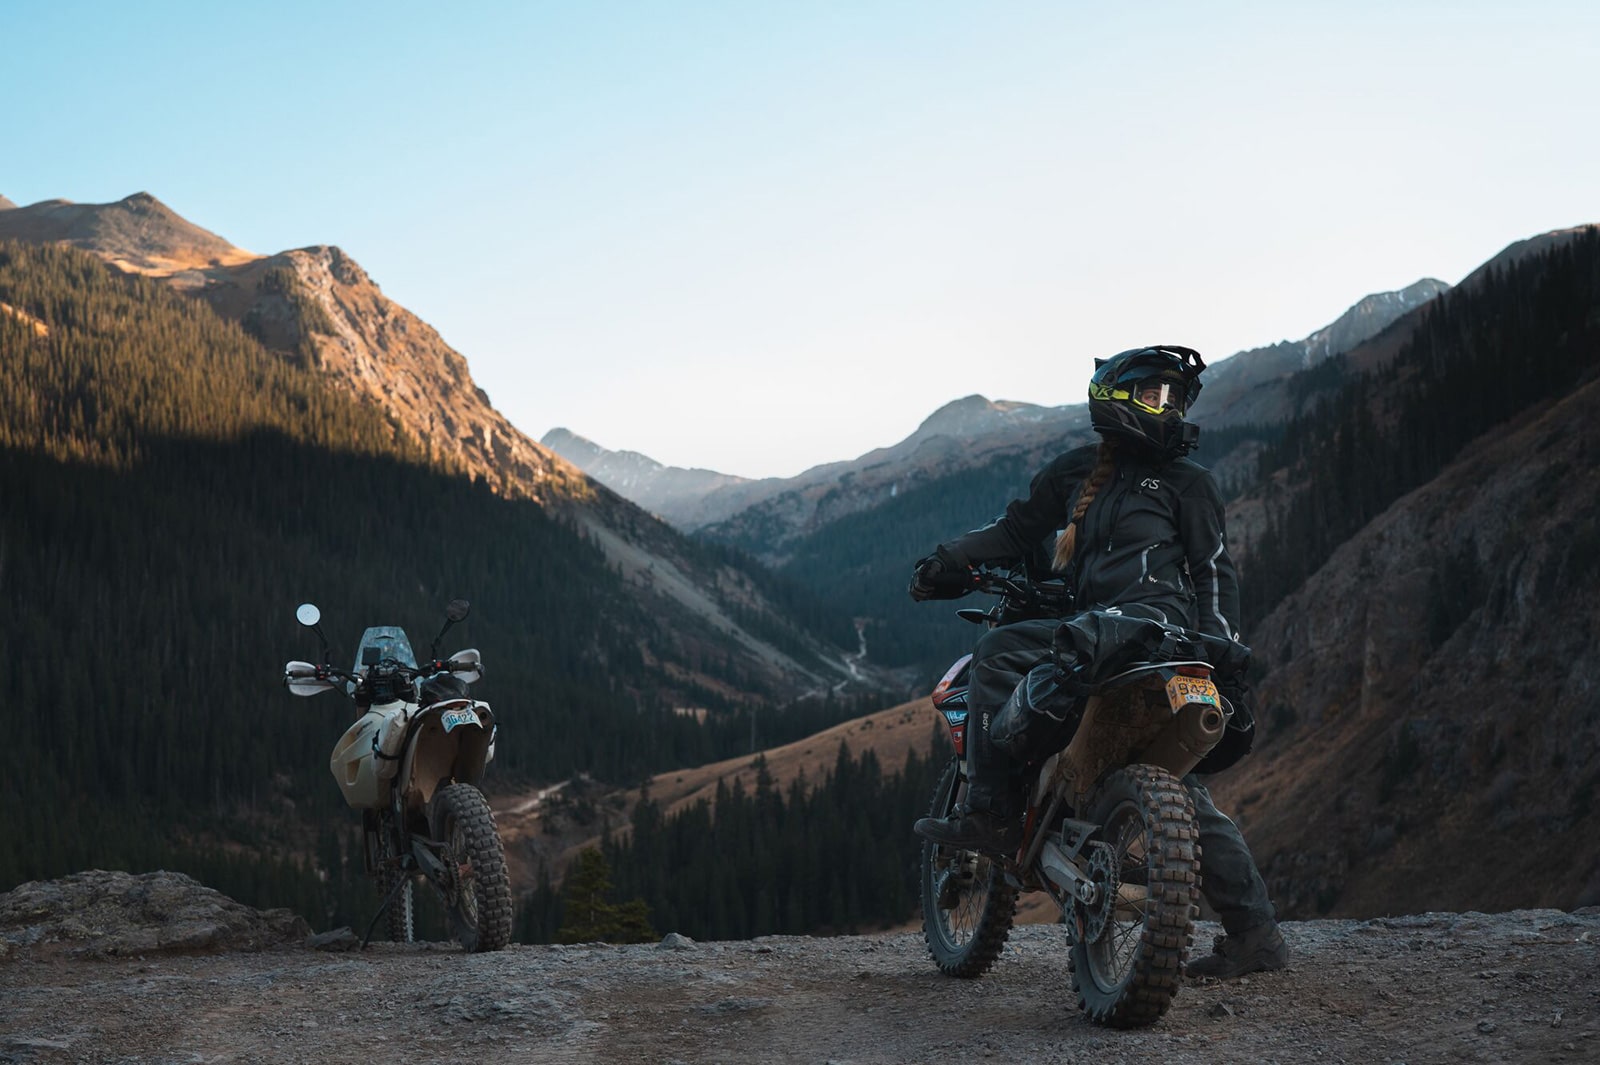 View of motorcycle trail in Colorado